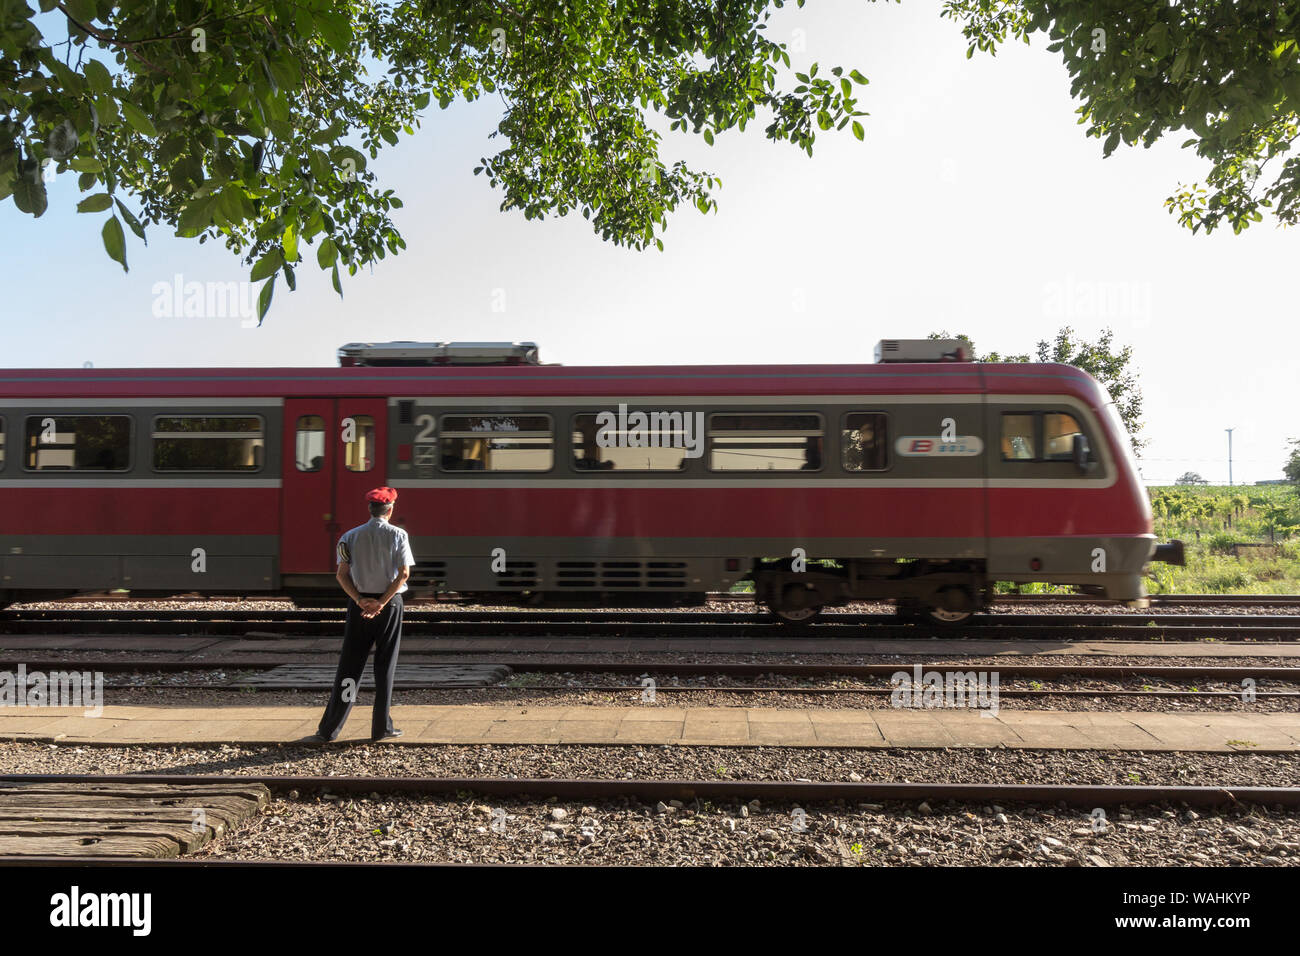 ALIBUNAR, SERBIA - JUNE 30, 2019: Regional DMU train passing by Alibunar train station being watched by a station master, a railworker in charge of ma Stock Photo